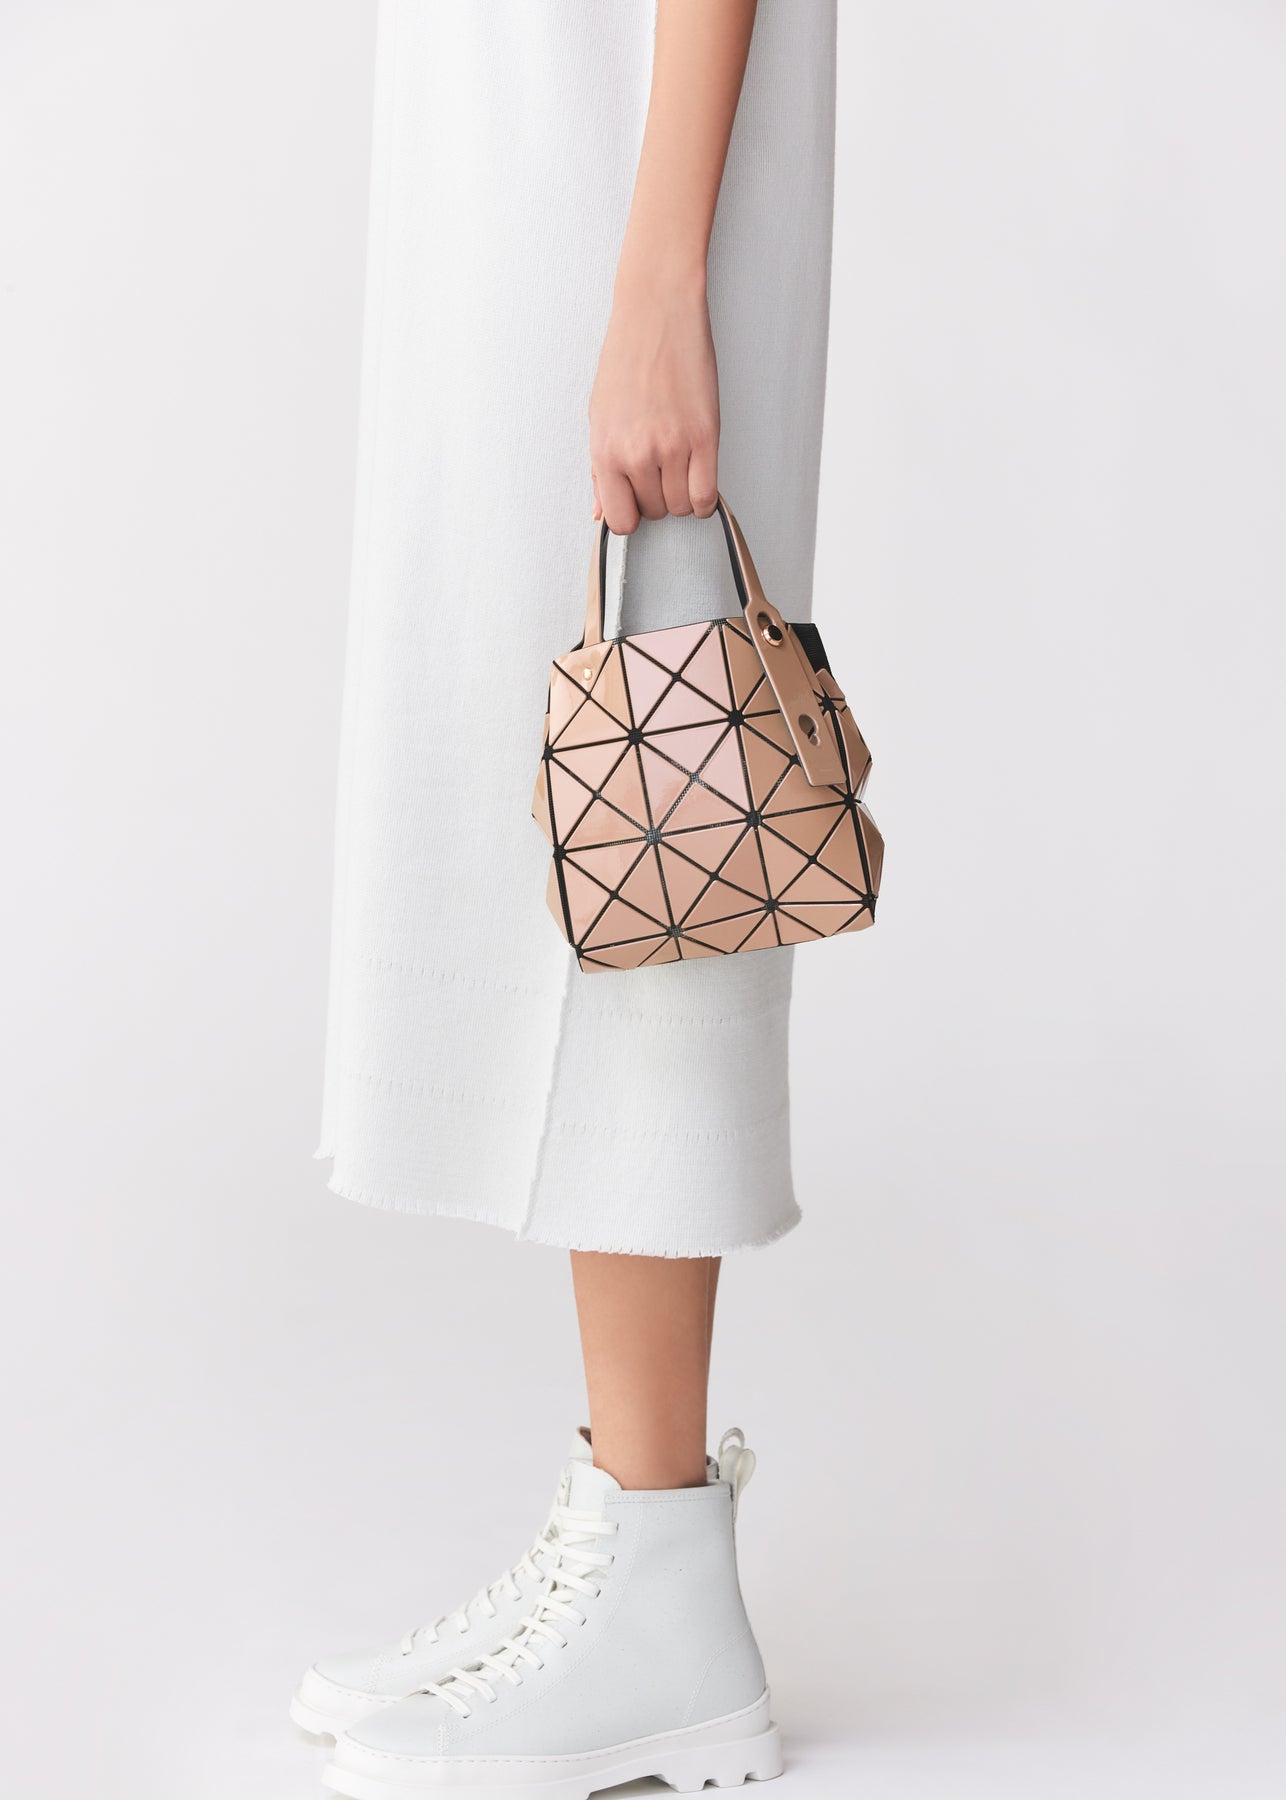 CARAT-2 HANDBAG | The official ISSEY MIYAKE ONLINE STORE | ISSEY 